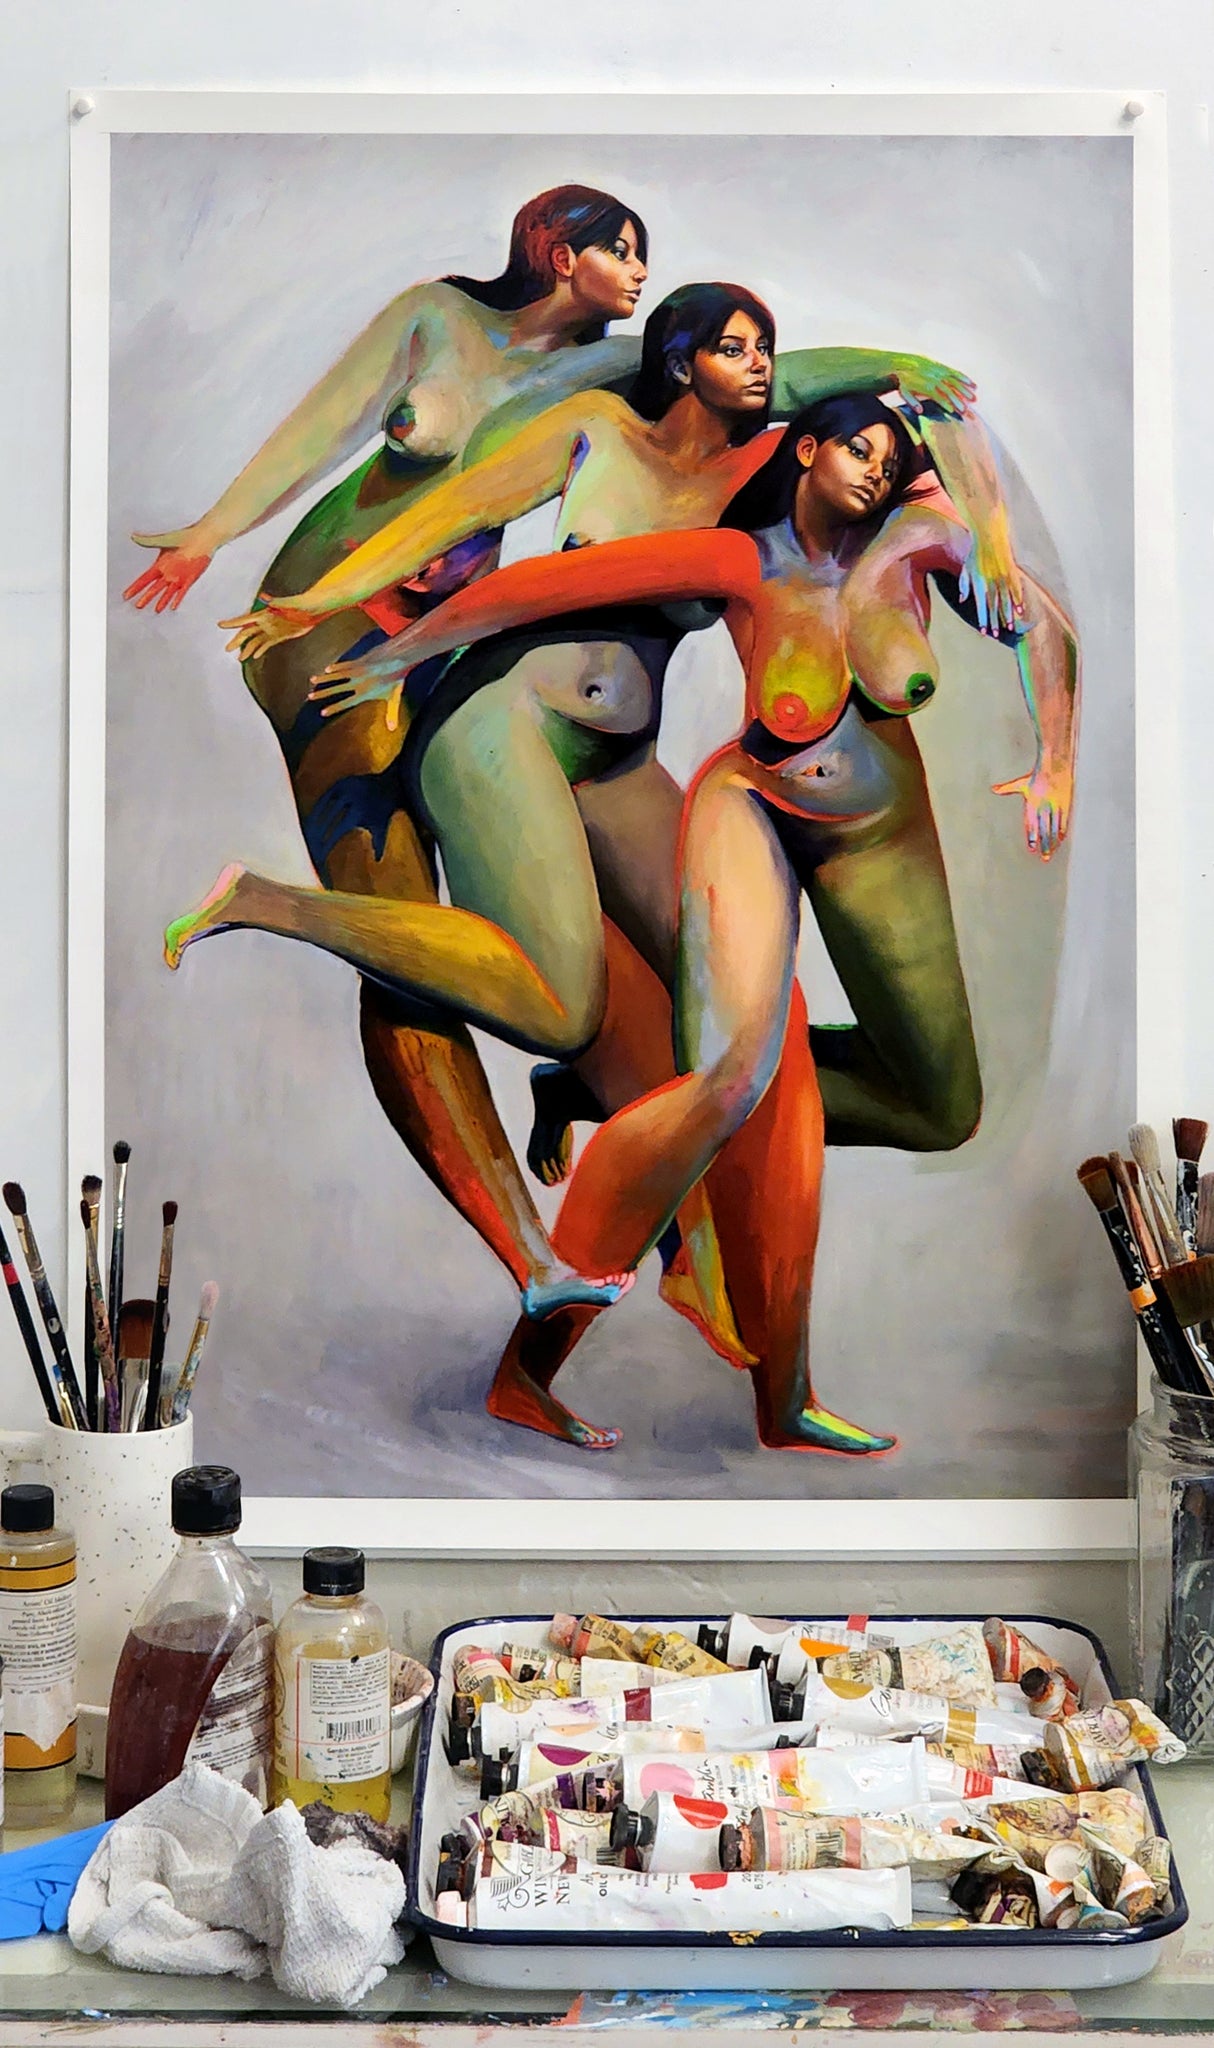 Erik Jones print of three nude figures with the same face and colorful bodies  - print hanging on wall with art supplies in foreground